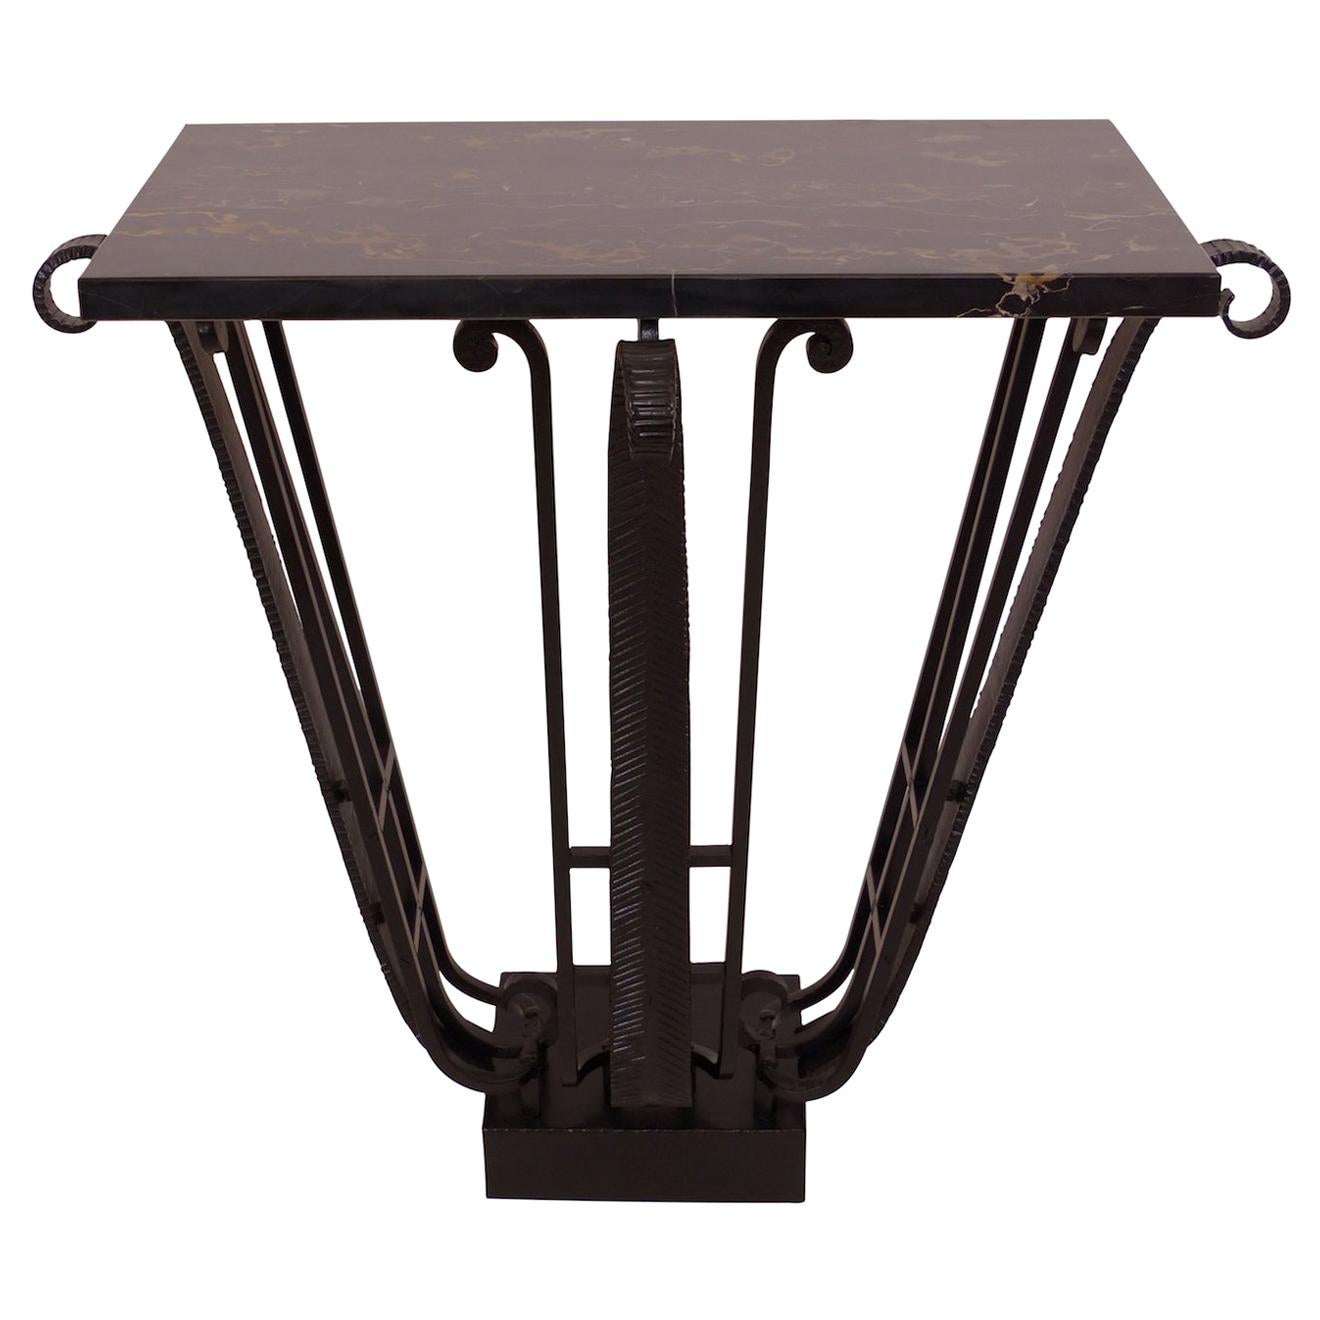 Lyra Shaped Art Deco Console Table Wrought Iron Foot with Portor Marble Top For Sale